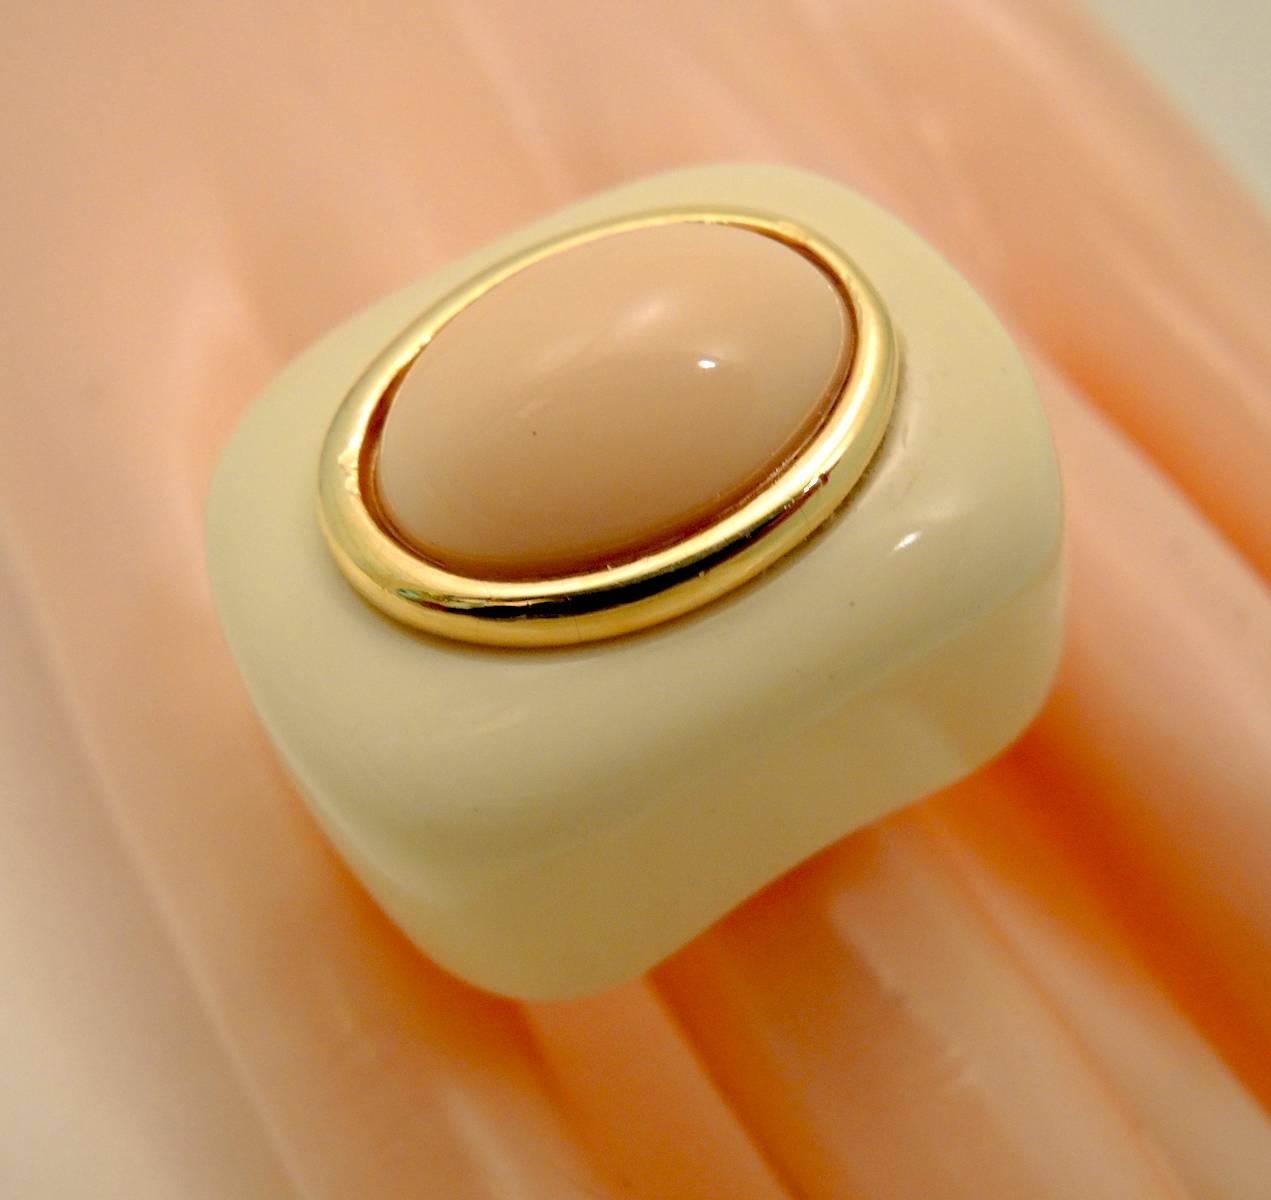 This Kenneth Jay Lane ring features a cream color resin ring with a pink or light coral oval cabochon center stone in a gold-tone bezel frame. The ring measures 1” x 1-1/4” and is adjustable up to a size 7.  It is signed “Kenneth Lane” and is in